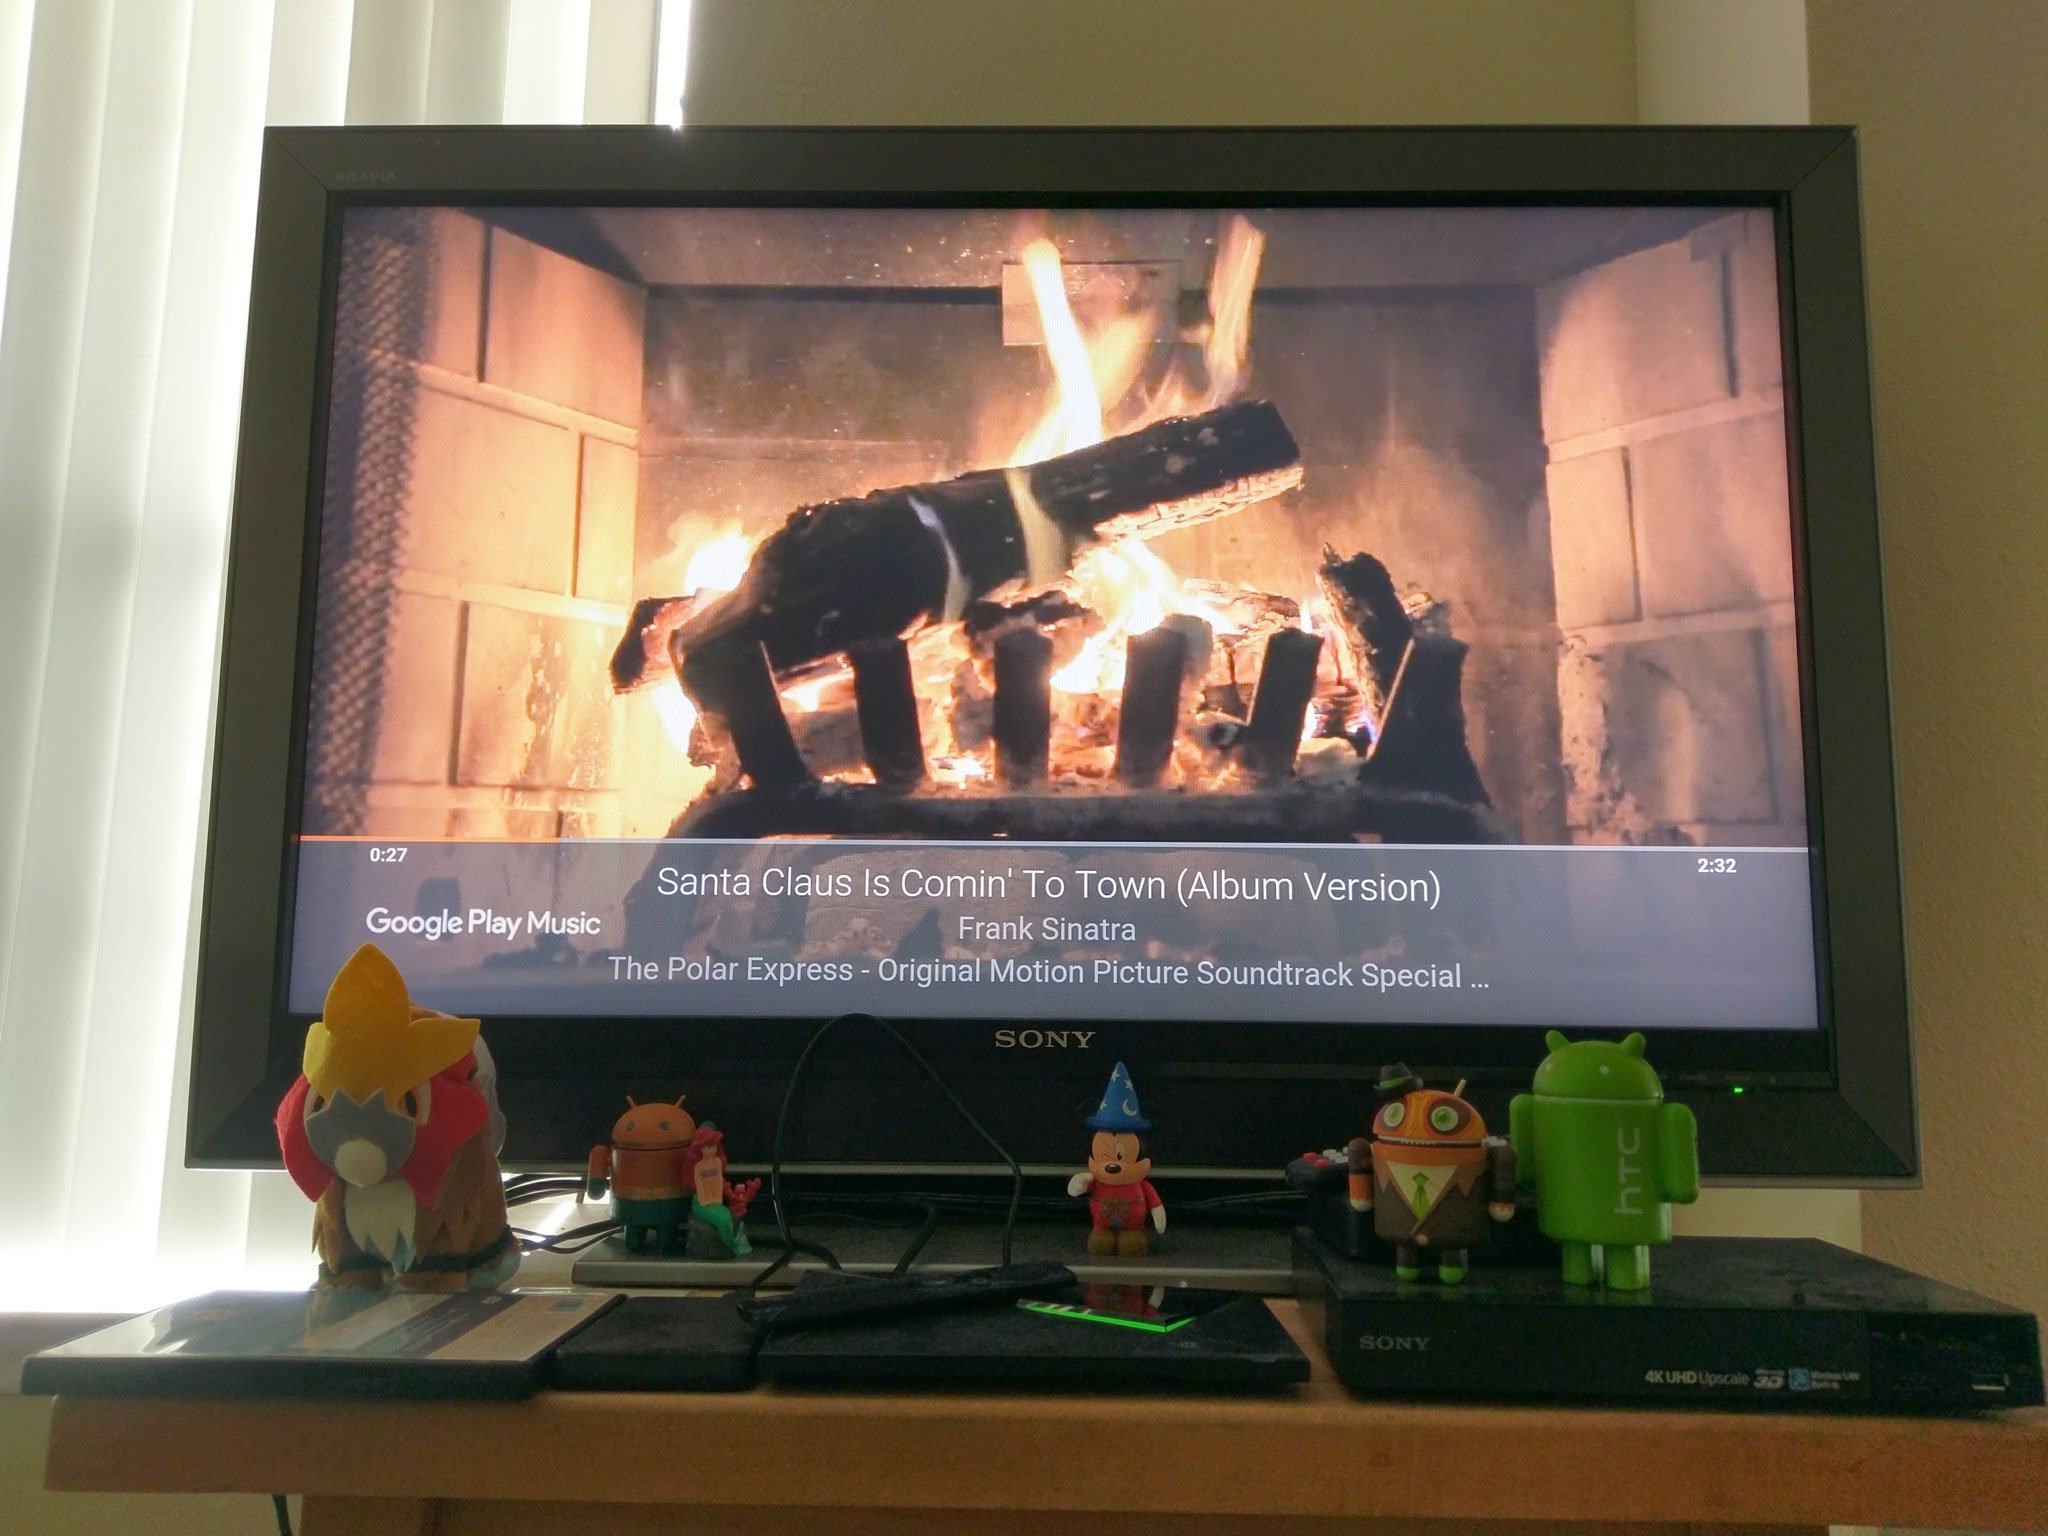 Turn any song into a log with Google Play Music's Fireplace Visualizer | Android Central